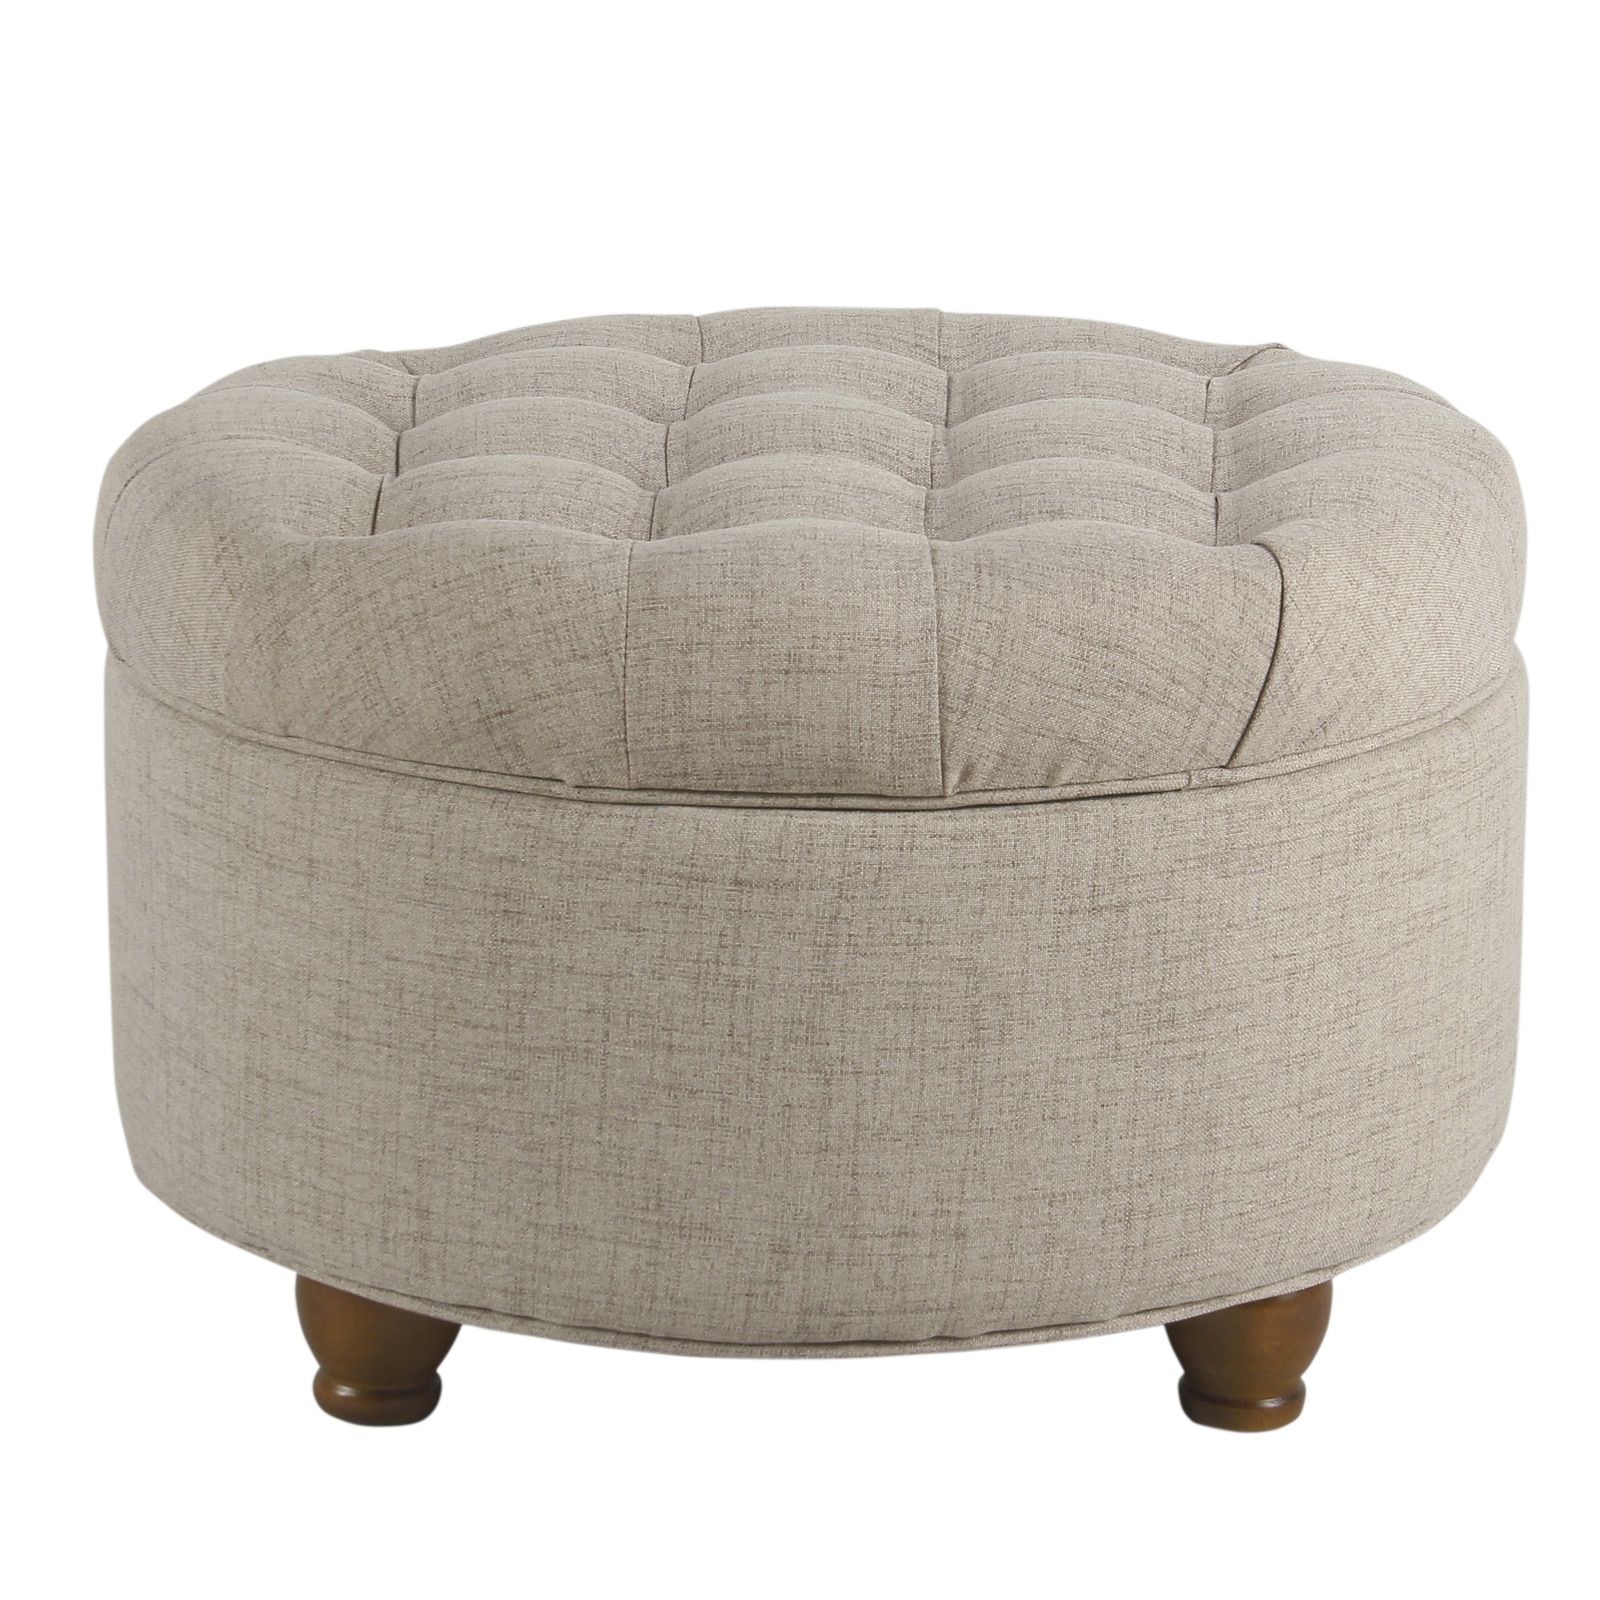 Homepop Large Tufted Round Storage Ottoman, Multiple Colors – Walmart In Round Pouf Ottomans (View 7 of 20)